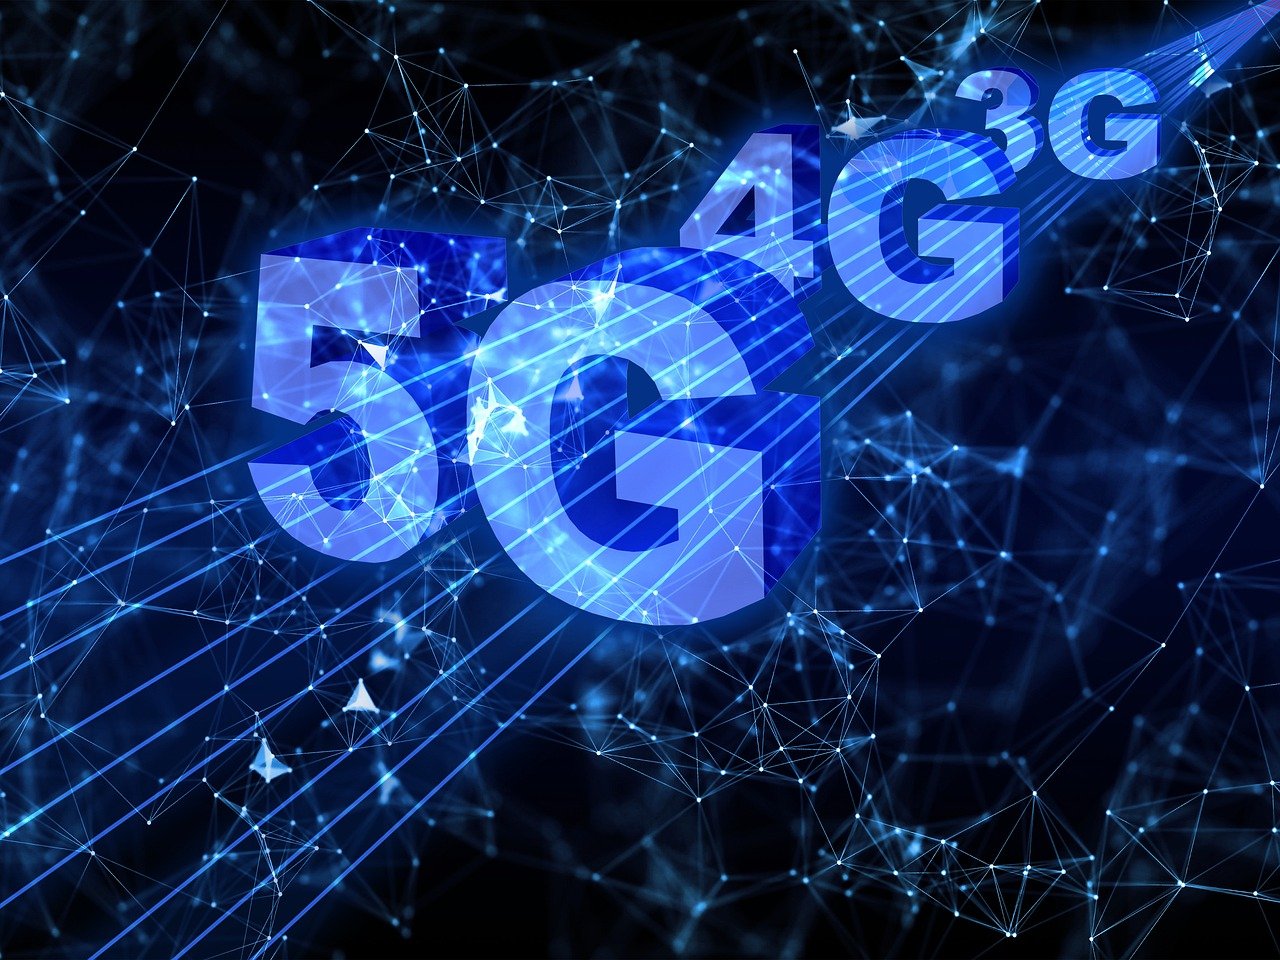 5G Coverage Expanding In Hungary As Mobile Data Demand Rises